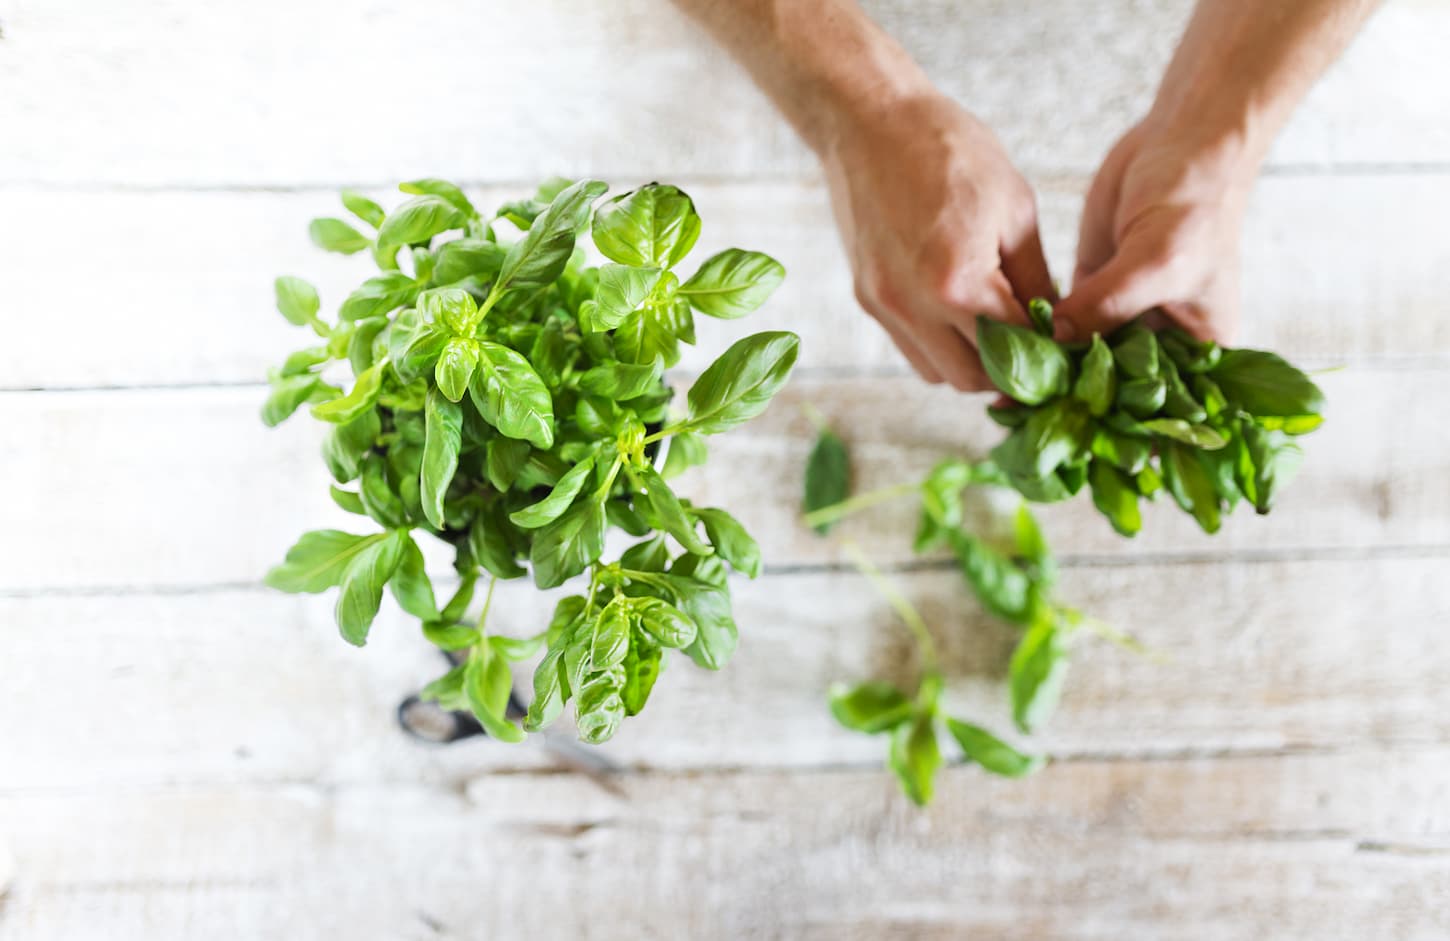 An image of basil leaves on a white wooden kitchen table held and collected by a man's hands.